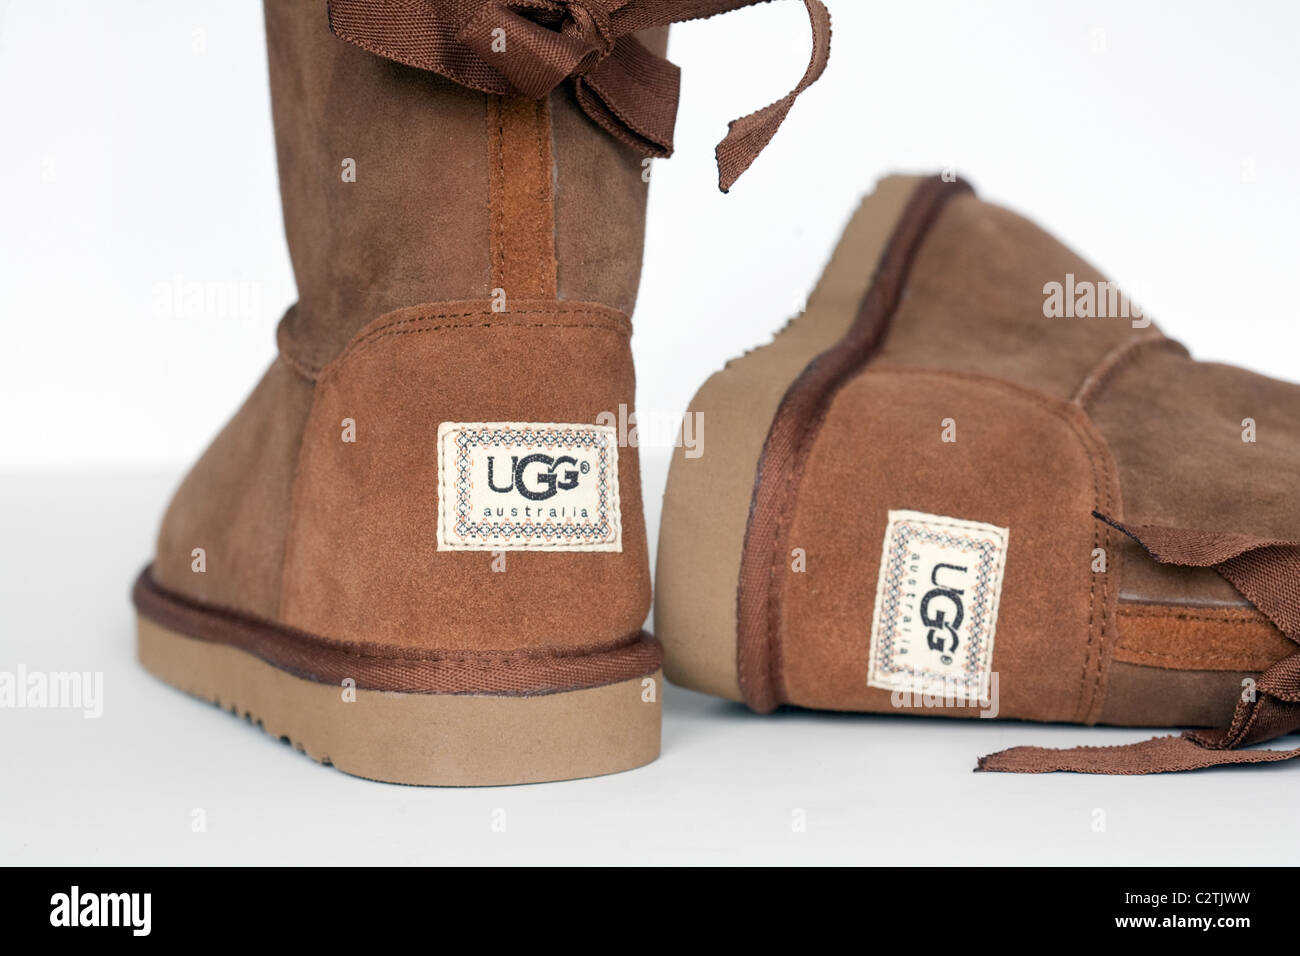 A pair of counterfeit Ugg boots made in china Stock Photo - Alamy